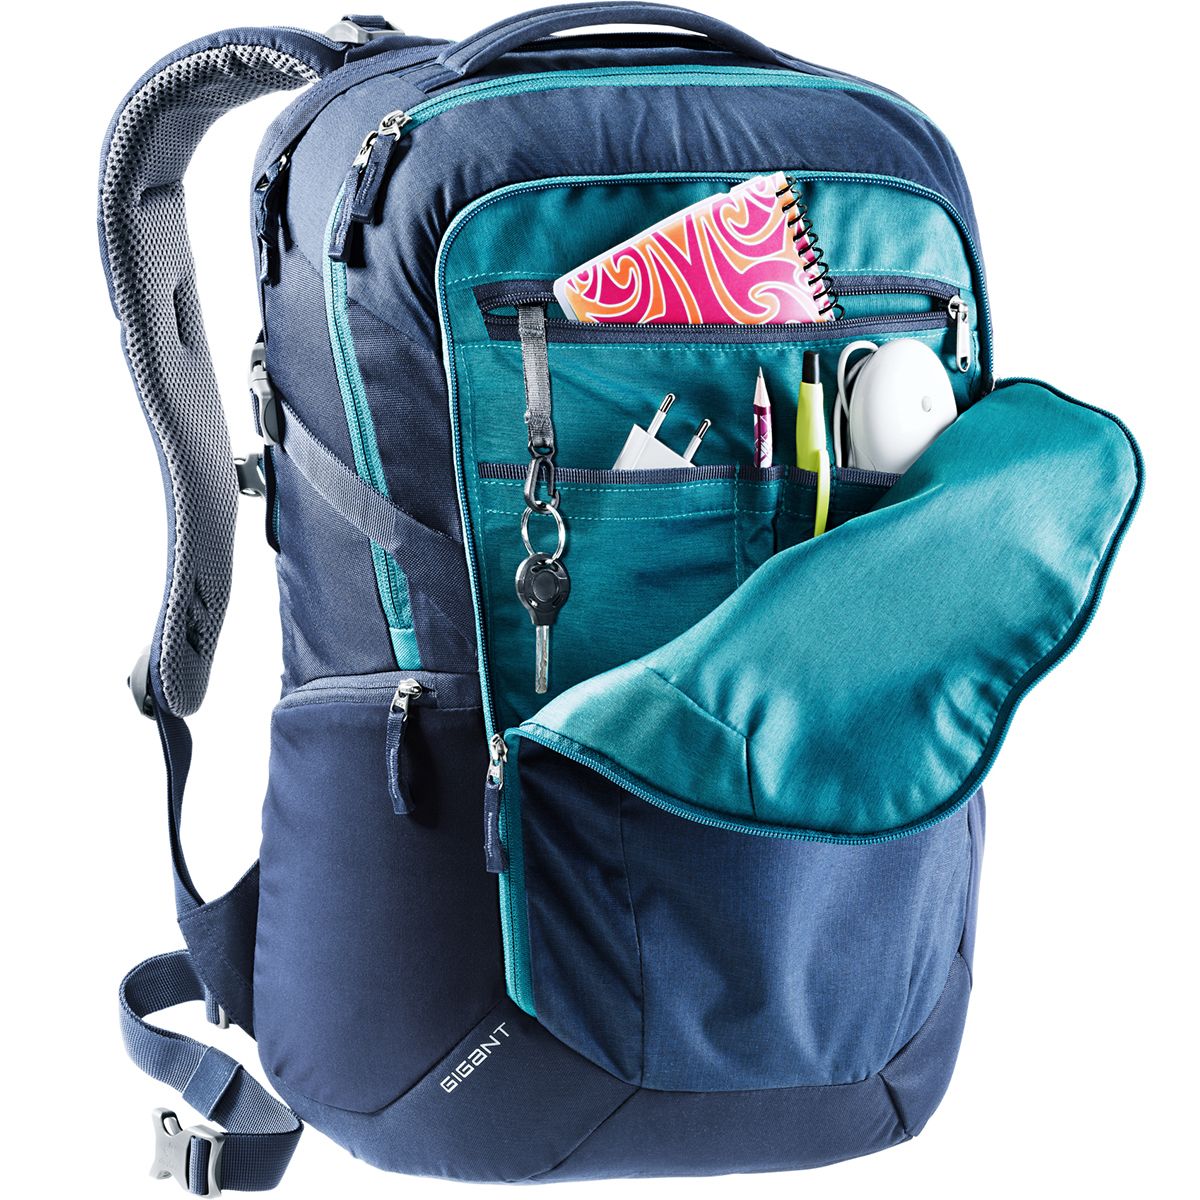 32L Backpack - Accessories